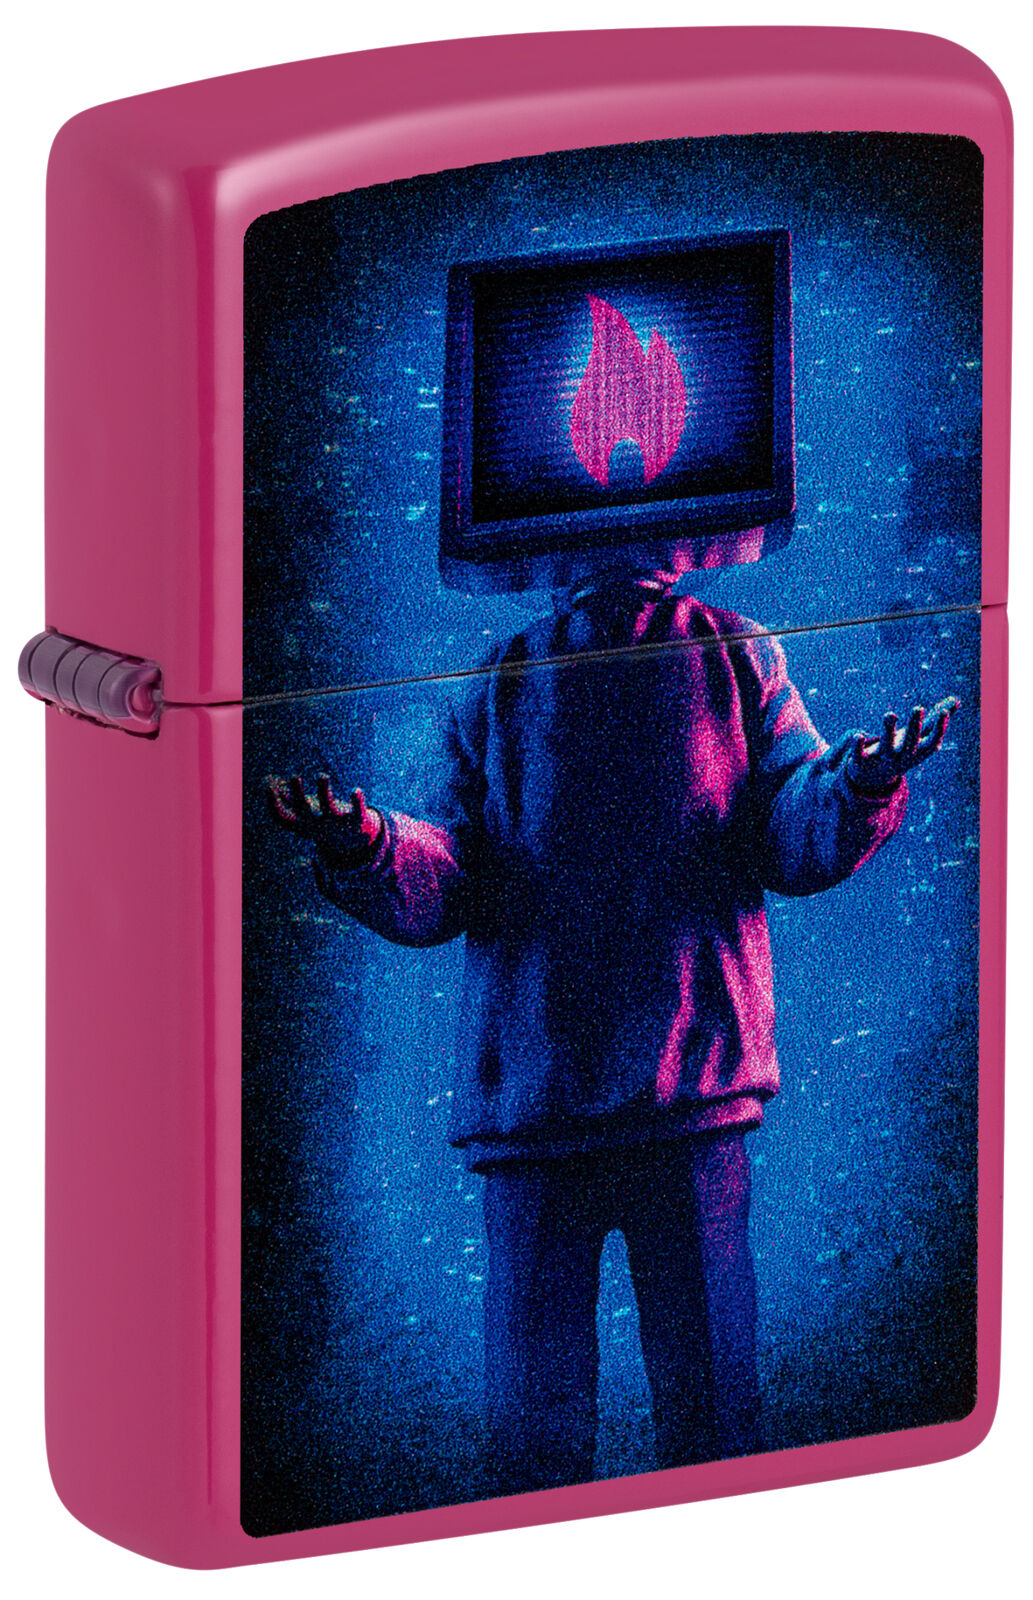 Zippo Flame TV Man Design Frequency Windproof Lighter, 48515